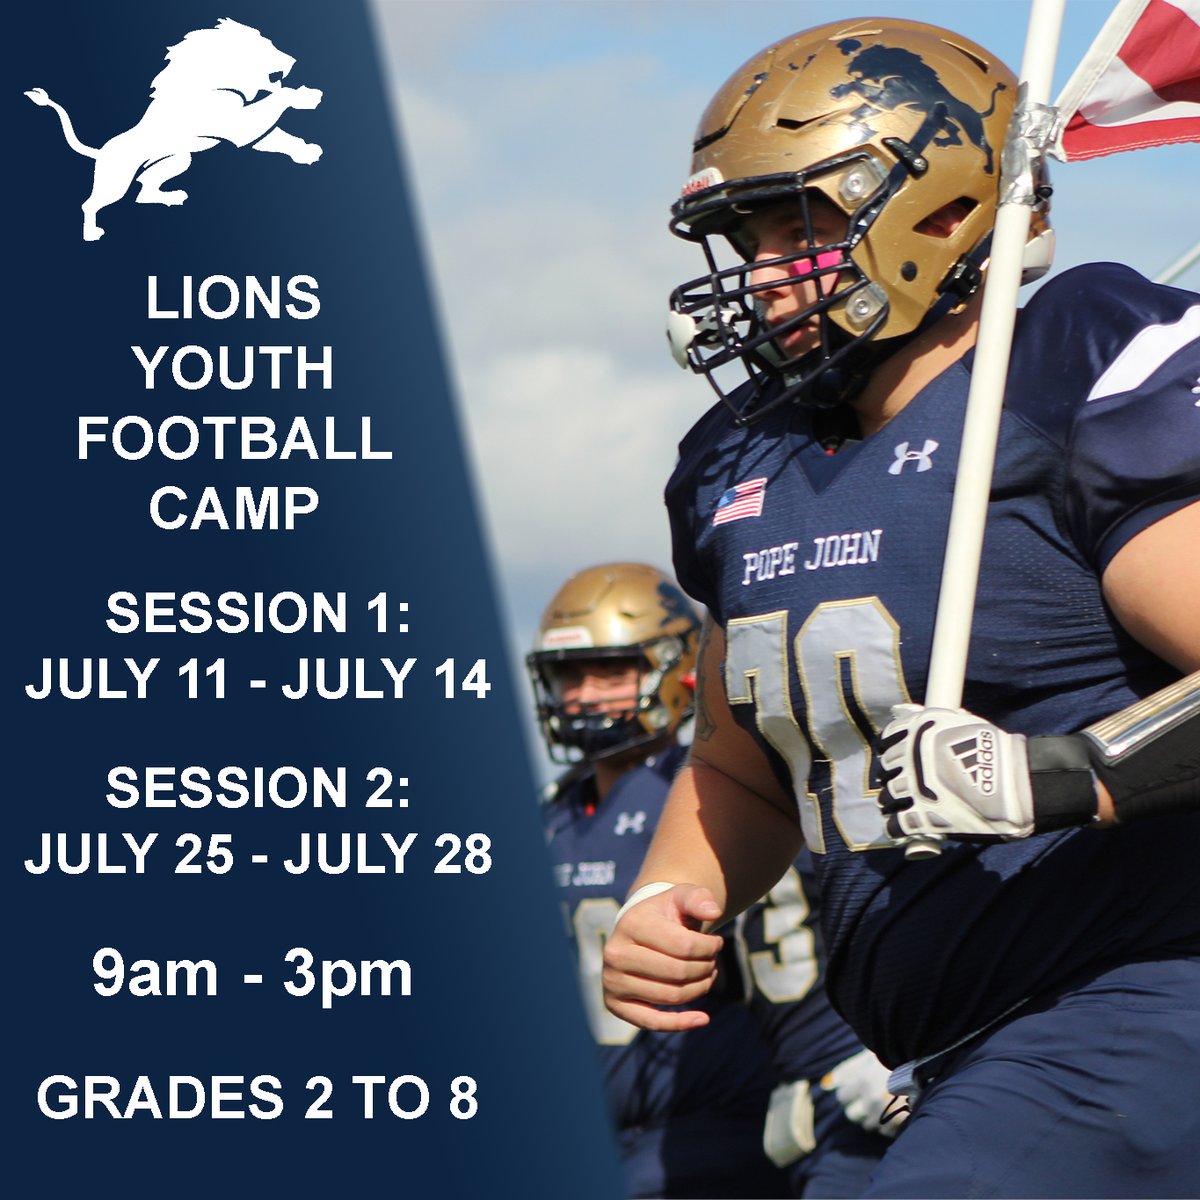 2022 LIONS FOOTBALL CAMP BE A PART OF THE PRIDE AND TRAIN LIKE A LION! Open to everyone from grades 2 to 8! Click here to register: popejohnathletics.sportngin.com/register/form/… #WeArePopeJohn #FaithFamilyFootball